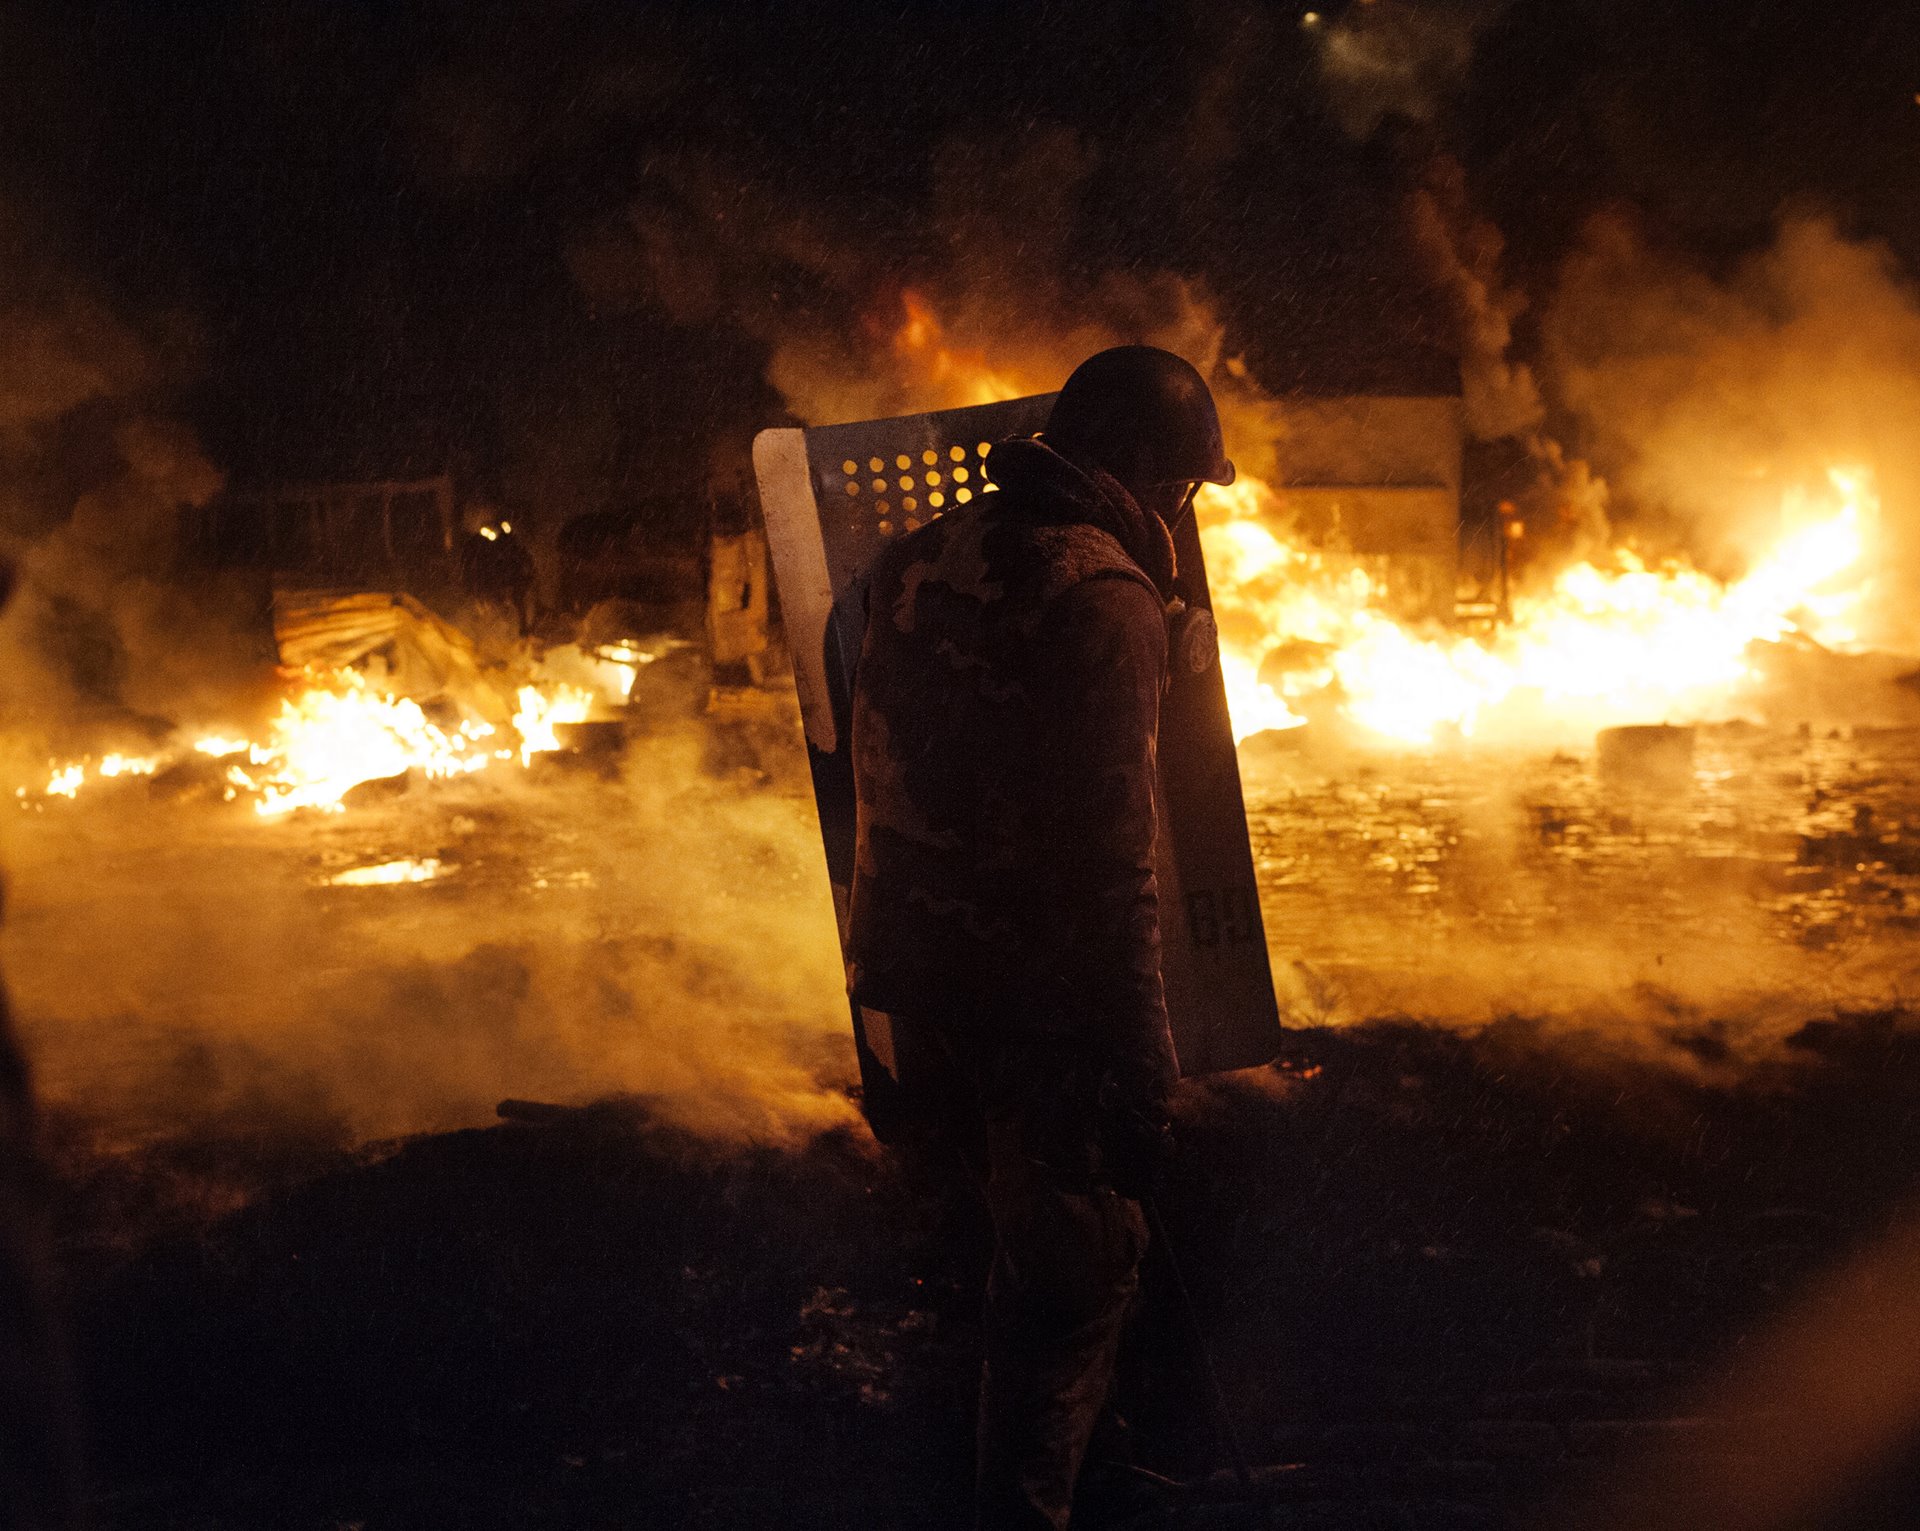 A wall of fire built by protestors as defense against armed attack by security forces burns on Hrushevskoho Street in the Ukraine capital, Kyiv. Protests broke out after pro-Russian president Viktor Yanukovych pulled out of signing an association agreement with the European Union, and were violently suppressed.